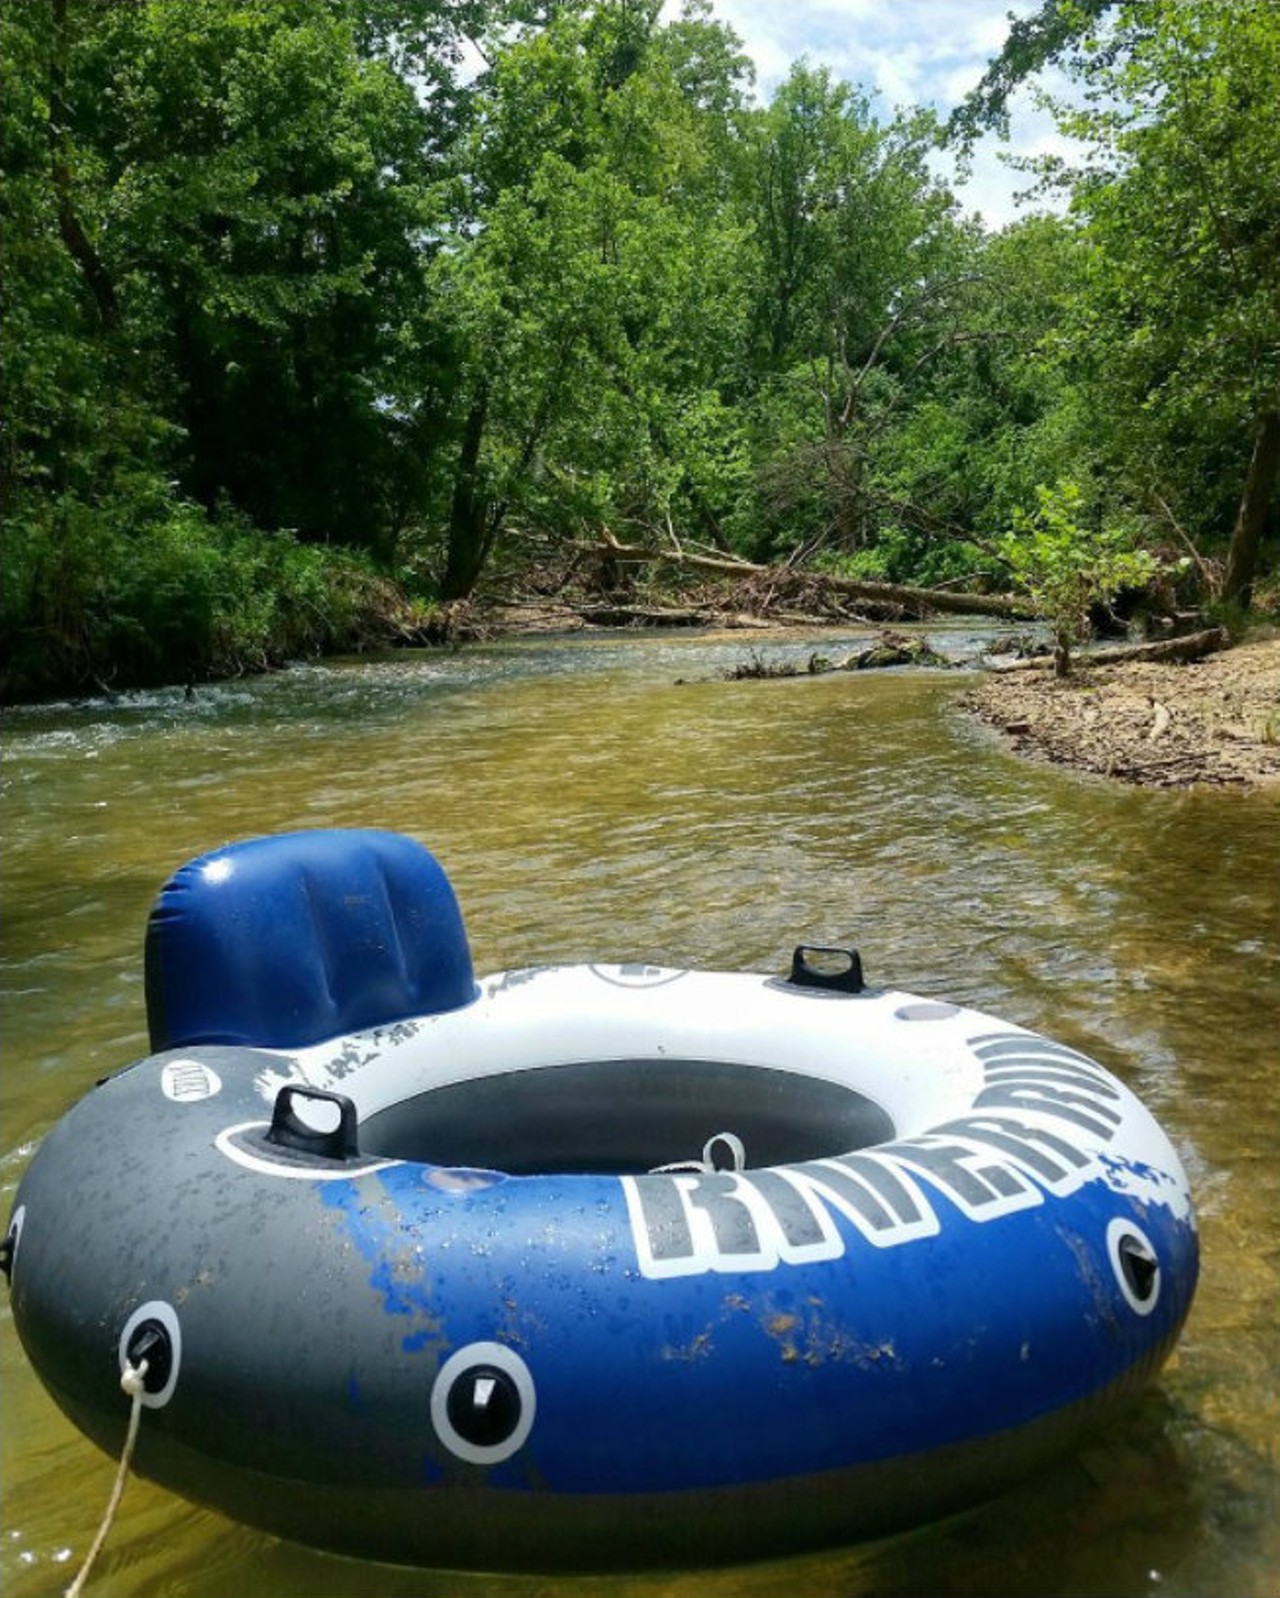 A number of lovely springs feed into Big Piney River, making it a great place to float. Some float trip options include Rich's Last Resort and Wilderness Ridge Resort. Photo courtesy of Instagram / dogwoodchannelcat.